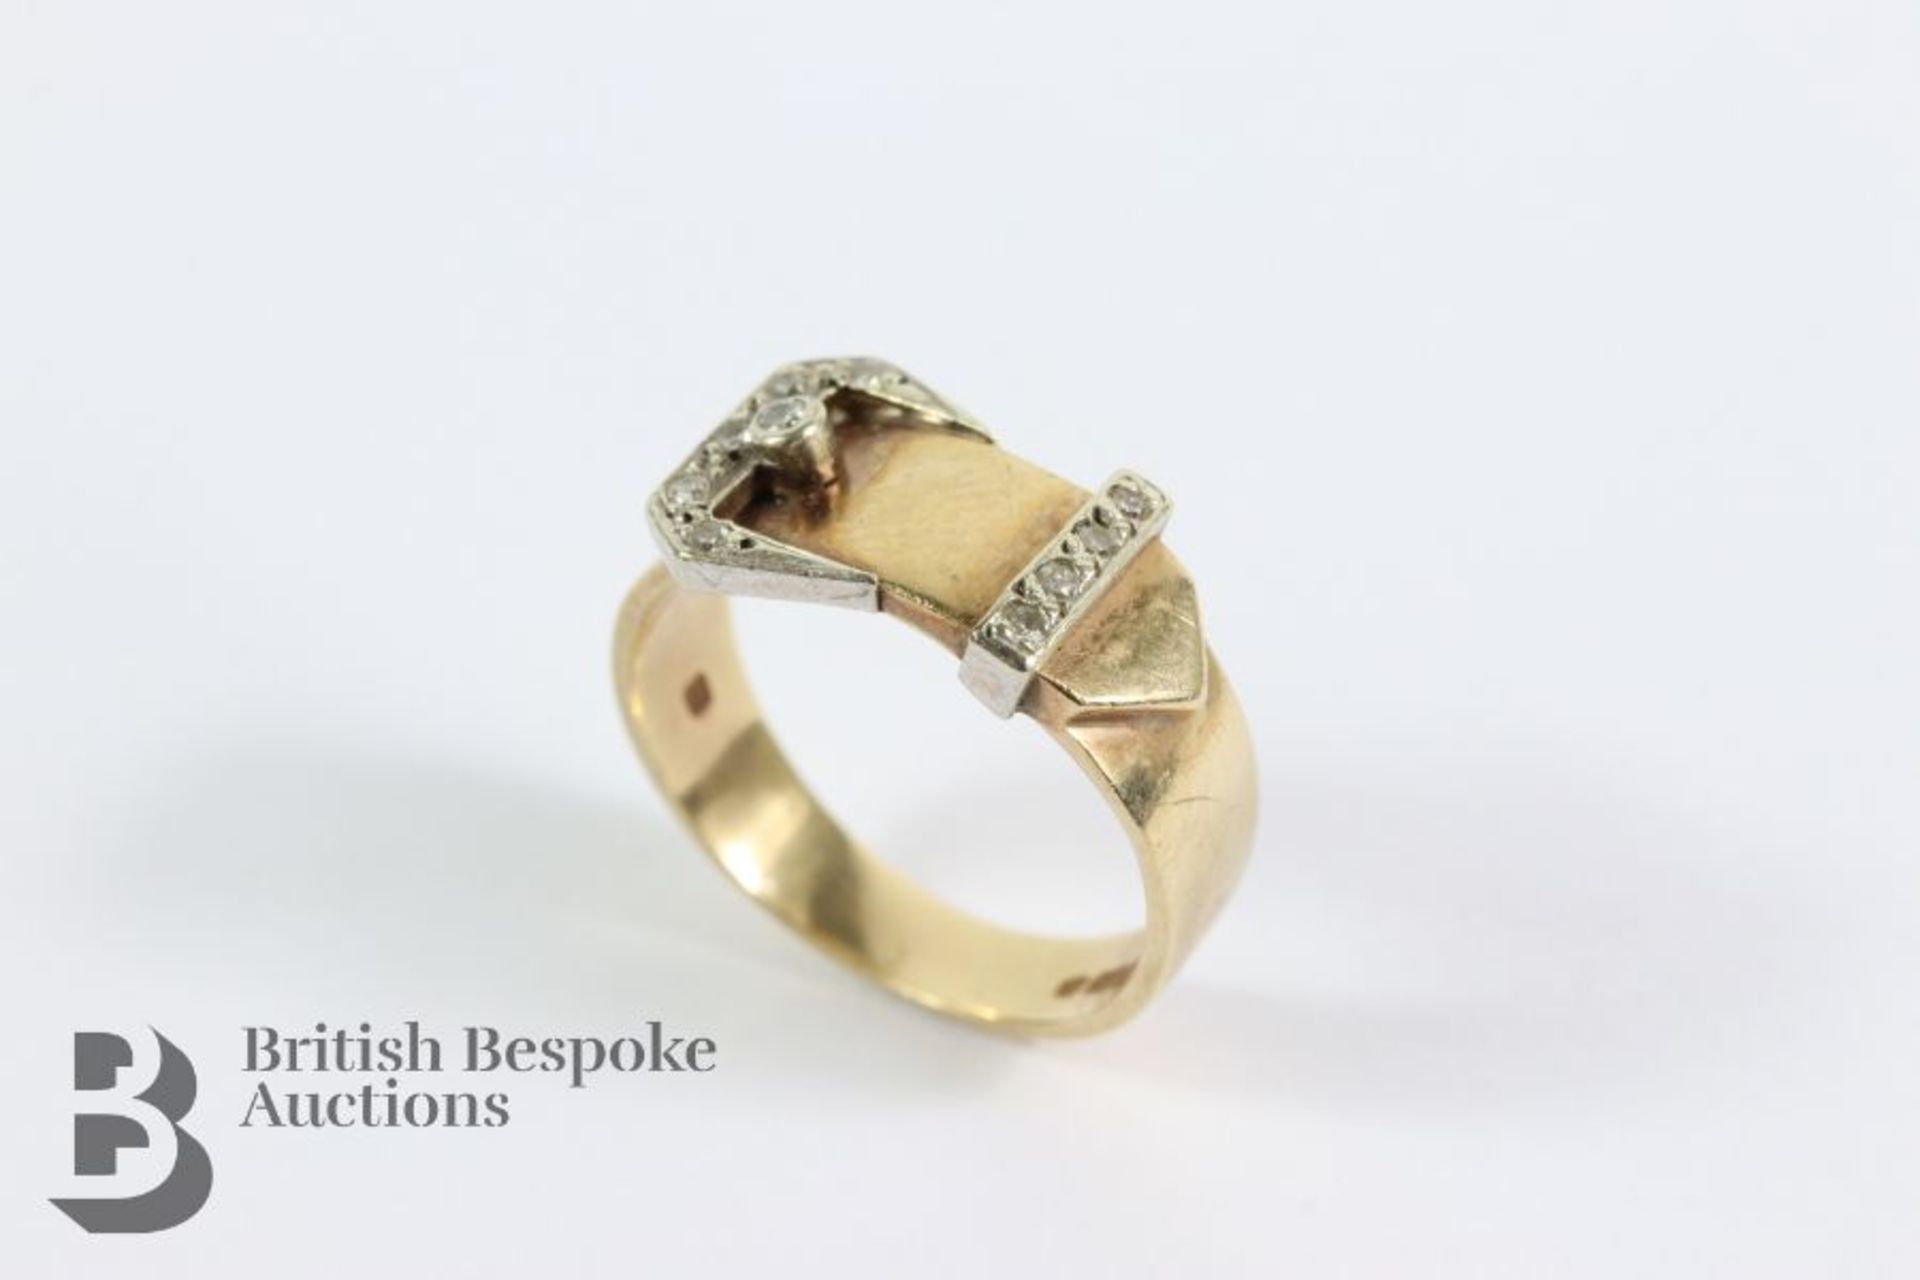 Vintage 9ct Gold Buckle Ring - Image 2 of 3